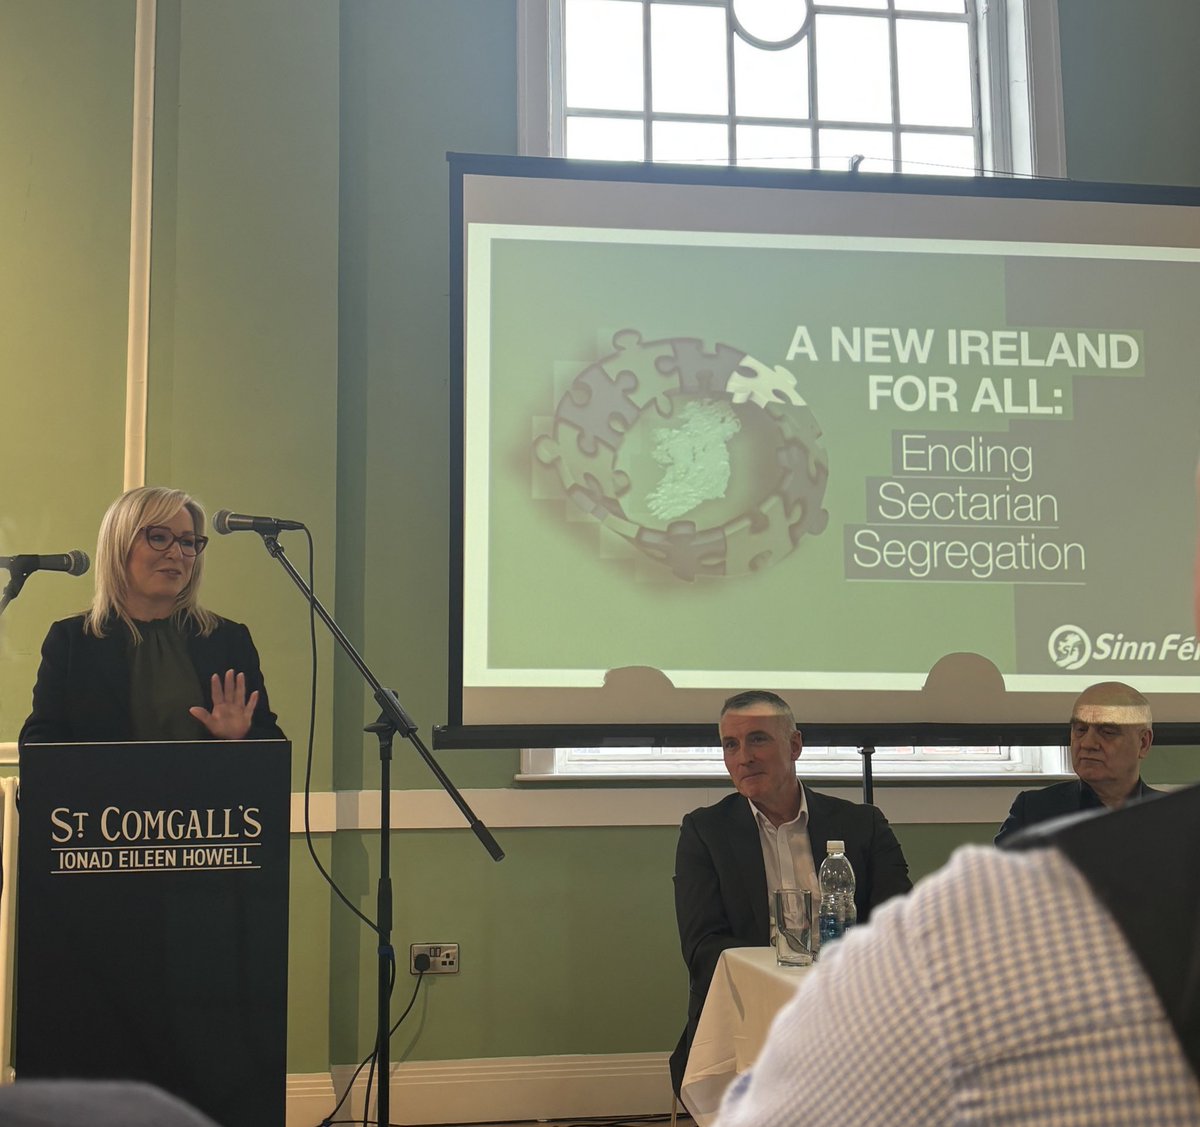 On this day 26 years ago the Good Friday Agreement was signed. Today @moneillsf launched a new document on ending sectarian segregation & building a new Ireland for all. Let’s make it happen. You can read the document here: sinnfein.ie/files/2024/A_N…